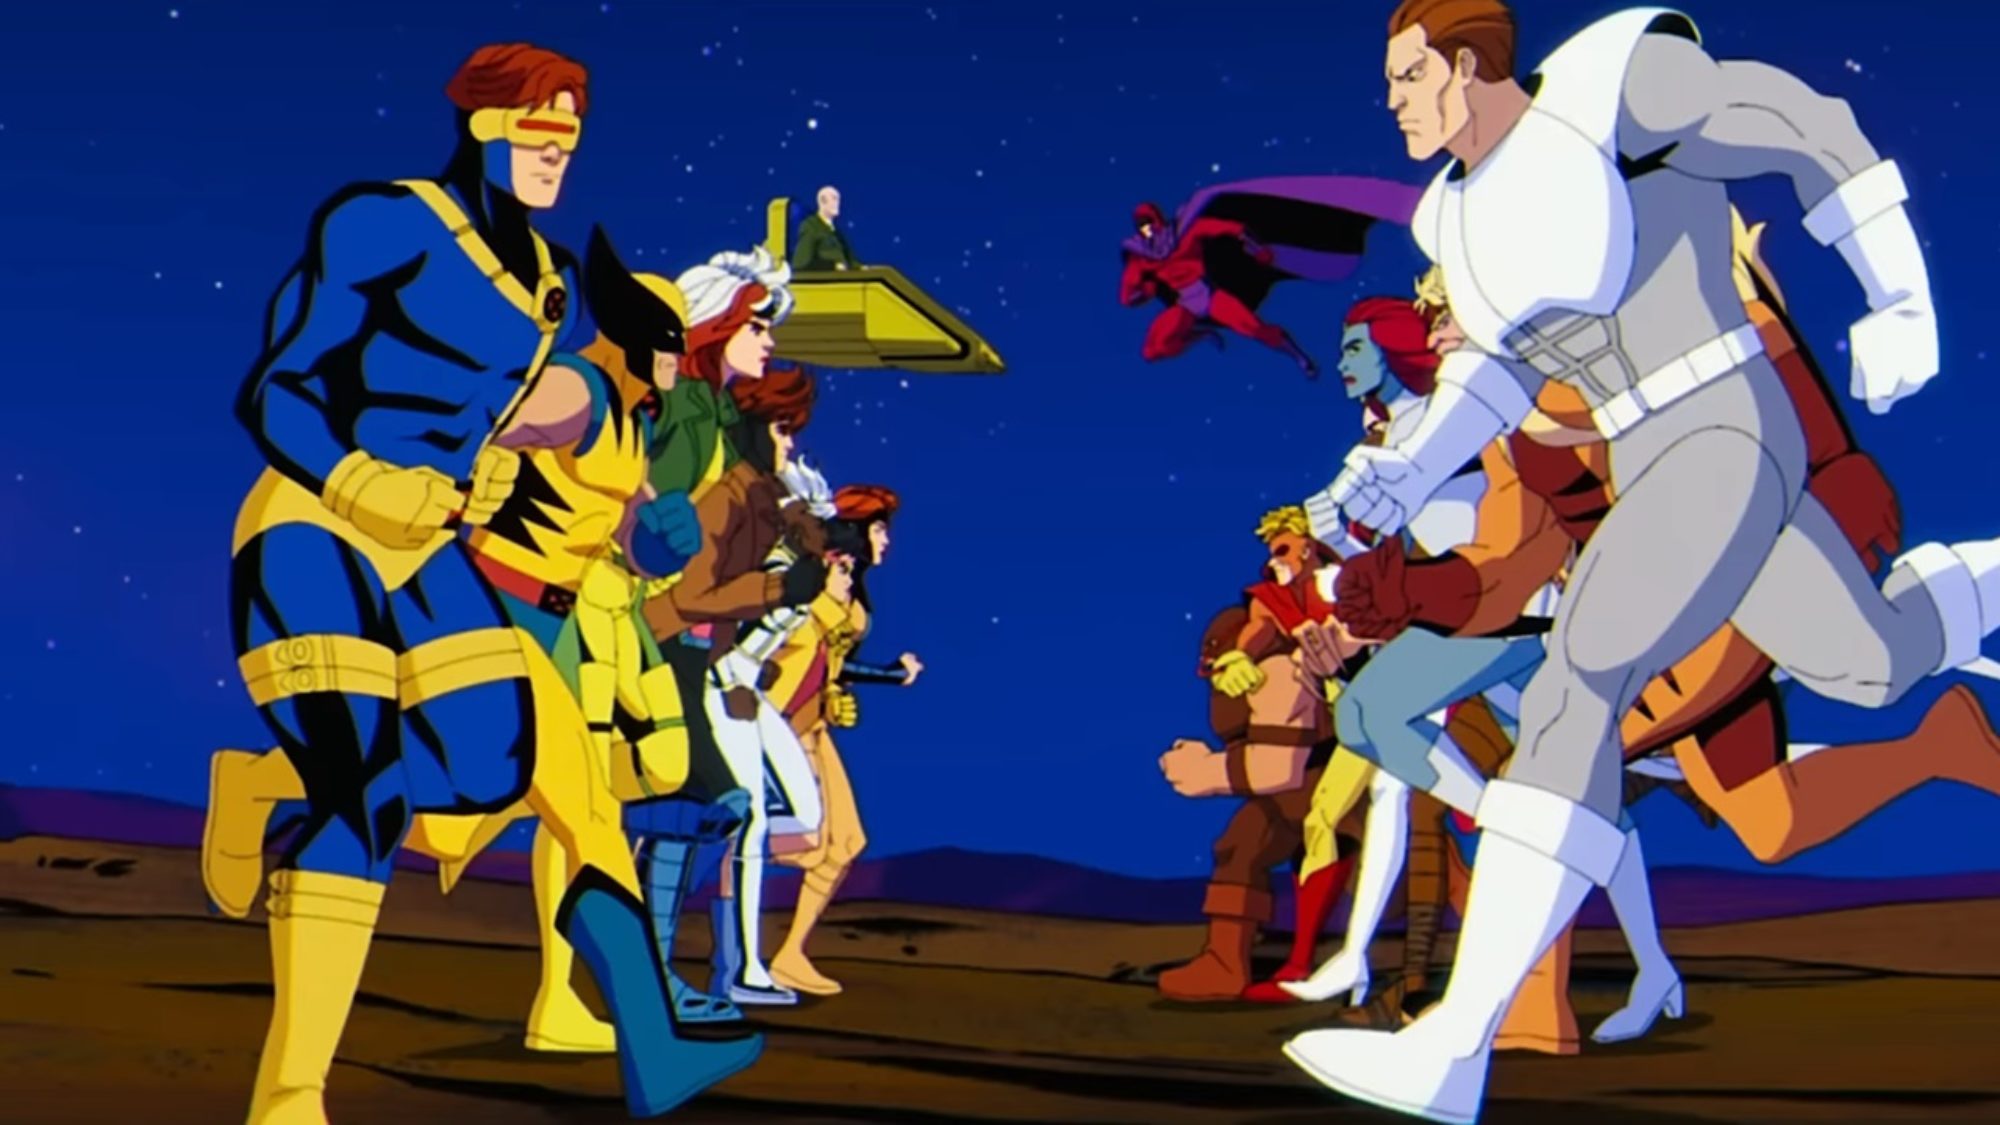 X-Men '97 Theme Composers Didn't Want to "Ruin the Nostalgic Vibes"